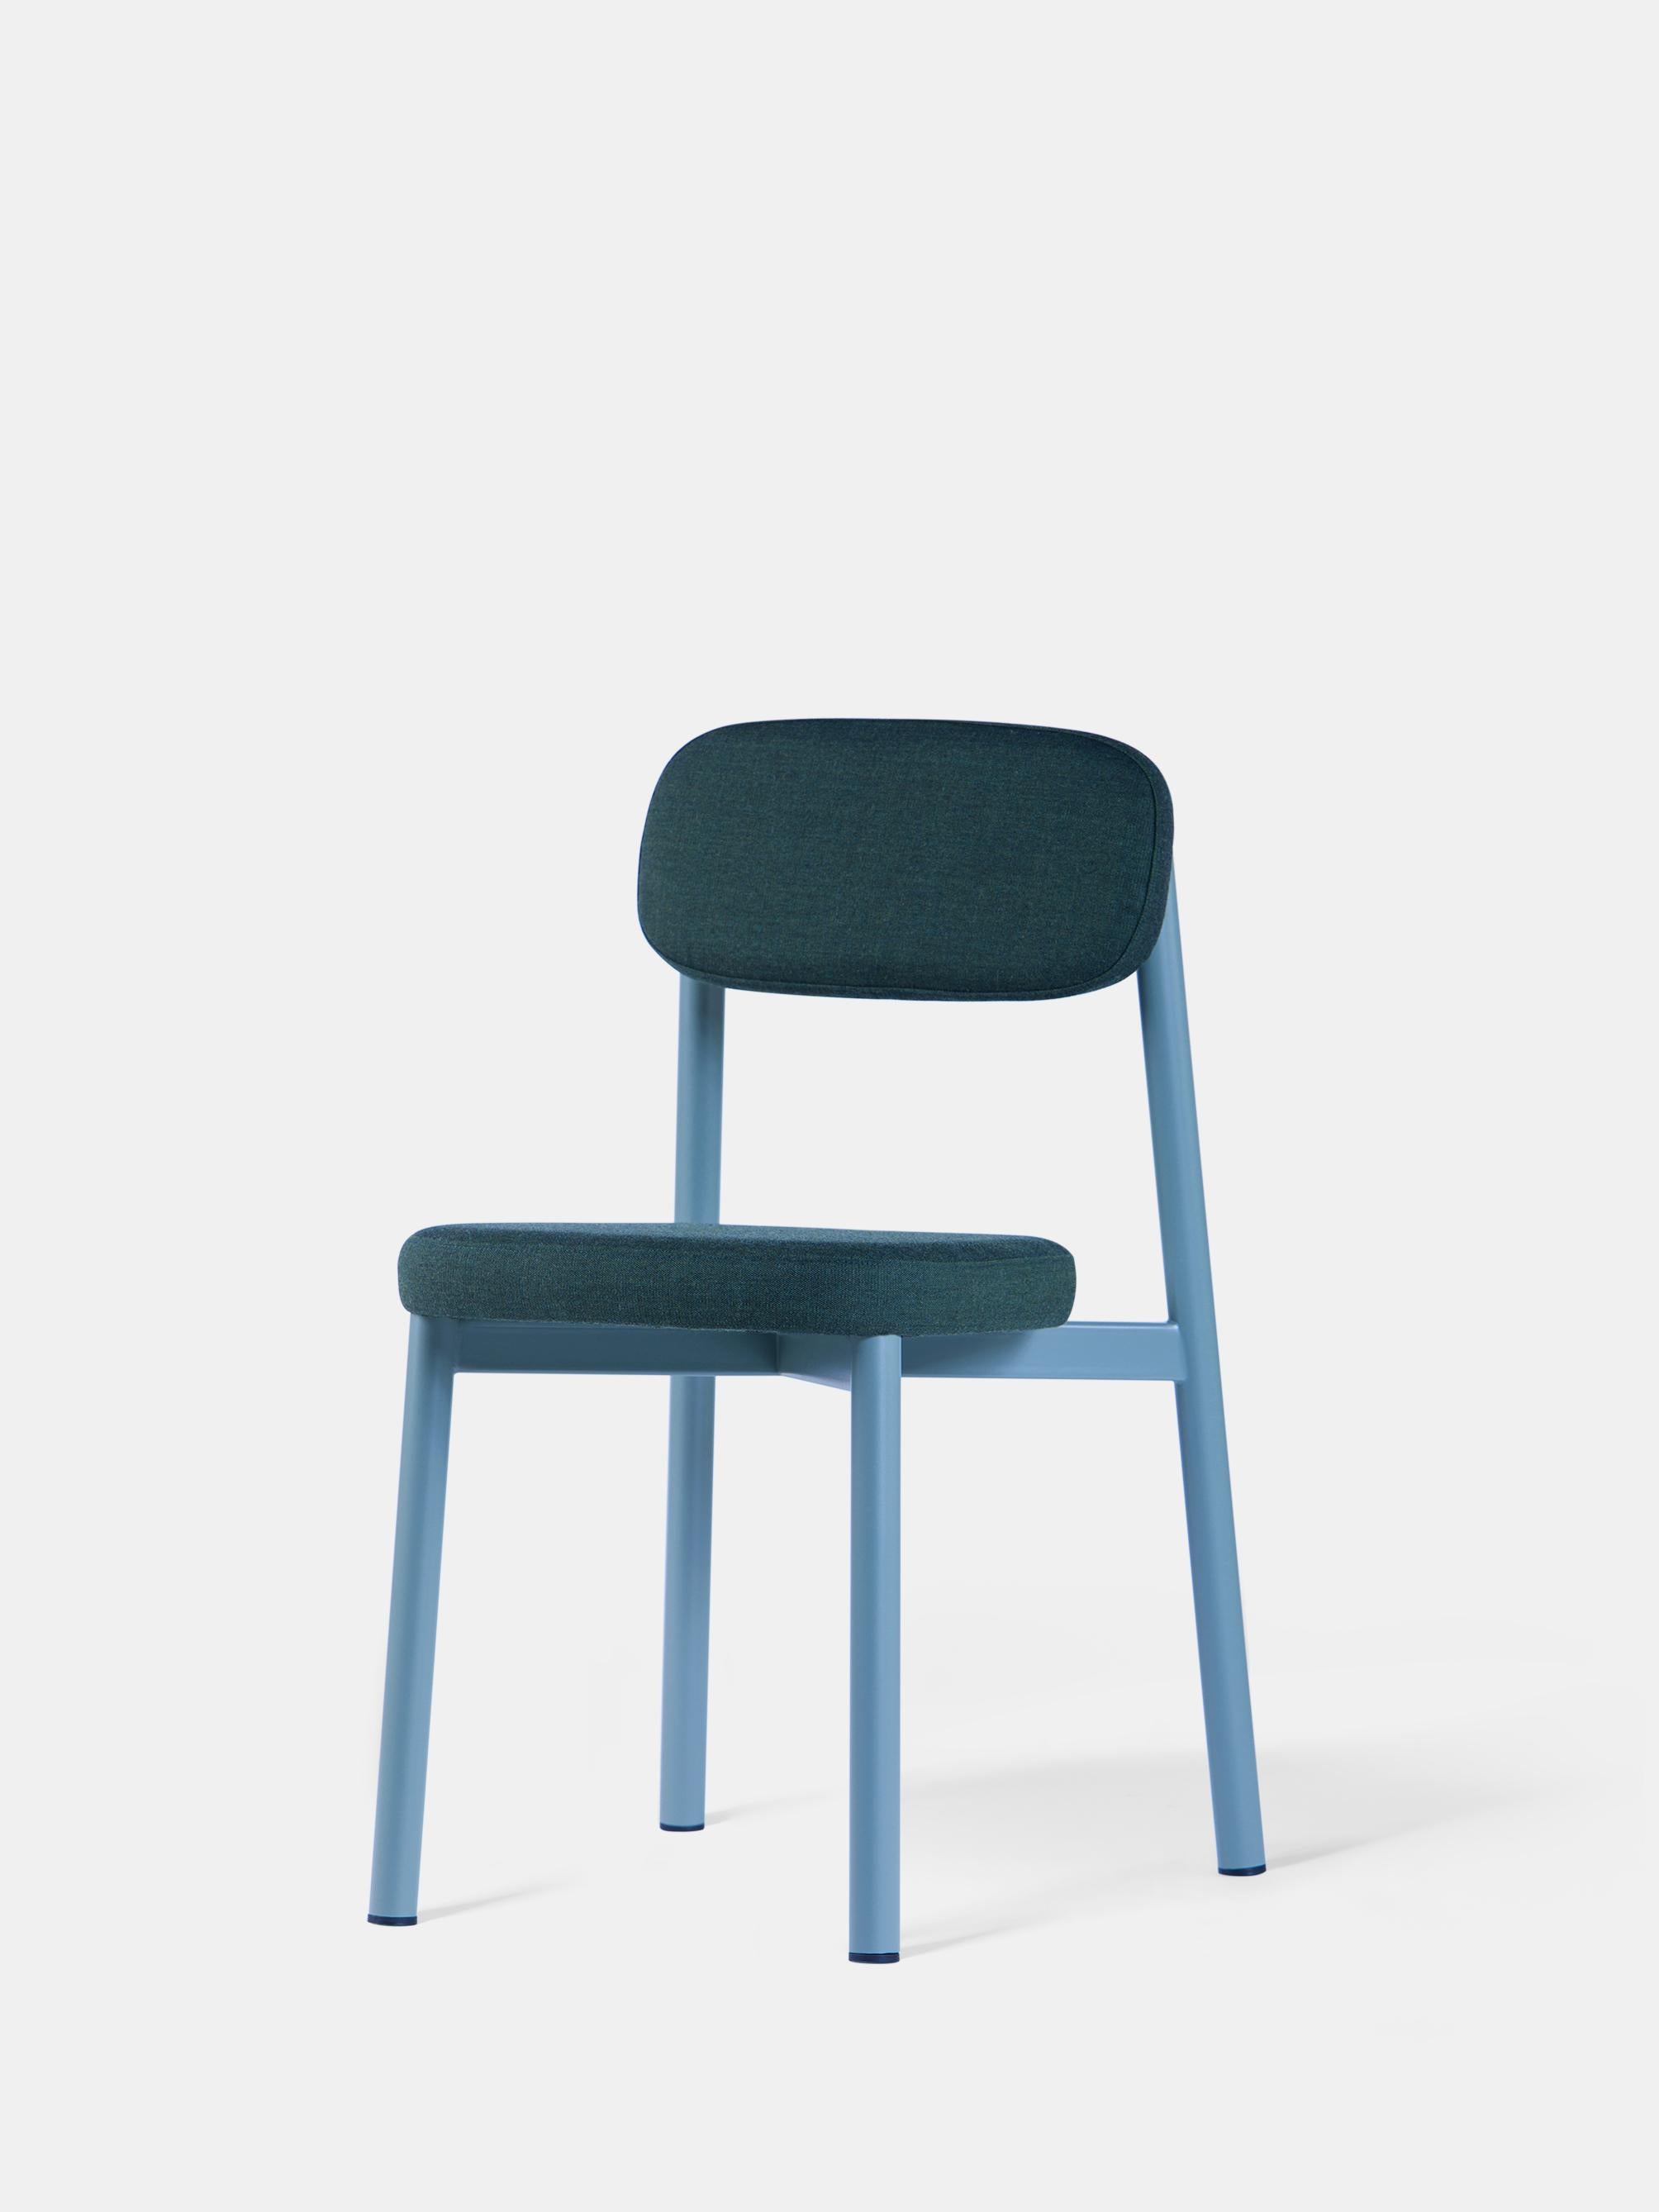 Set of 6 Green Residence Chairs by Kann Design
Dimensions: D 43 x W 50 x H 77 cm.
Materials: Steel tube, HR foam, fabric upholstery Kvadrat canvas 996 (90% wool, 10% nylon).
Available in other colors.

All of the Residence seats were created by